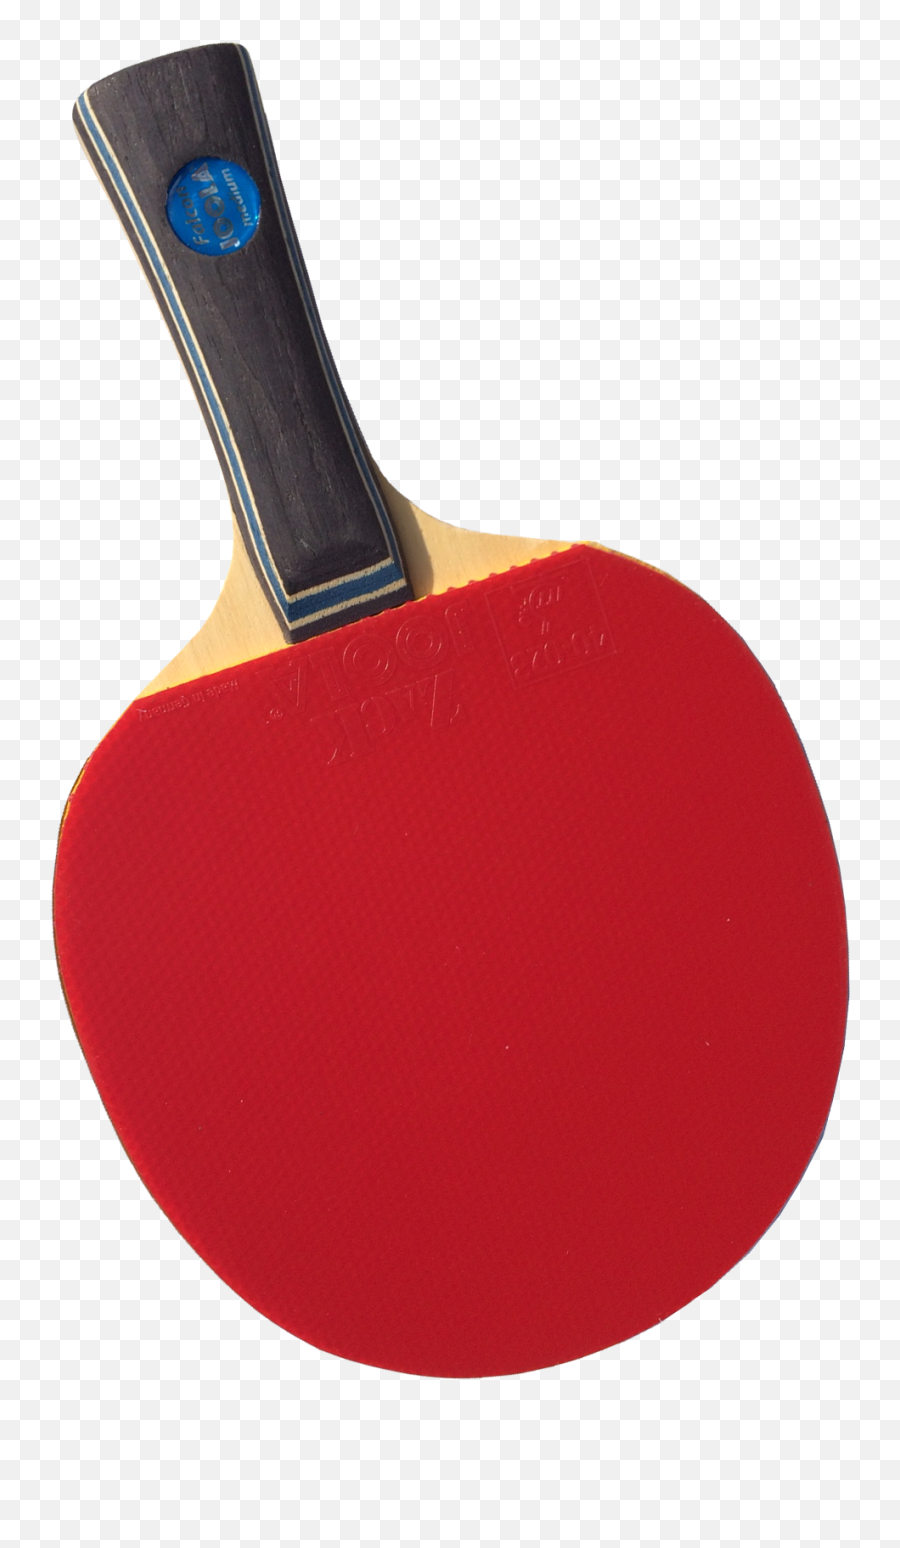 Table Tennis Racket Png Image Free Download Searchpngcom - Table Tennis Paddle Transparent,Ping Pong Png